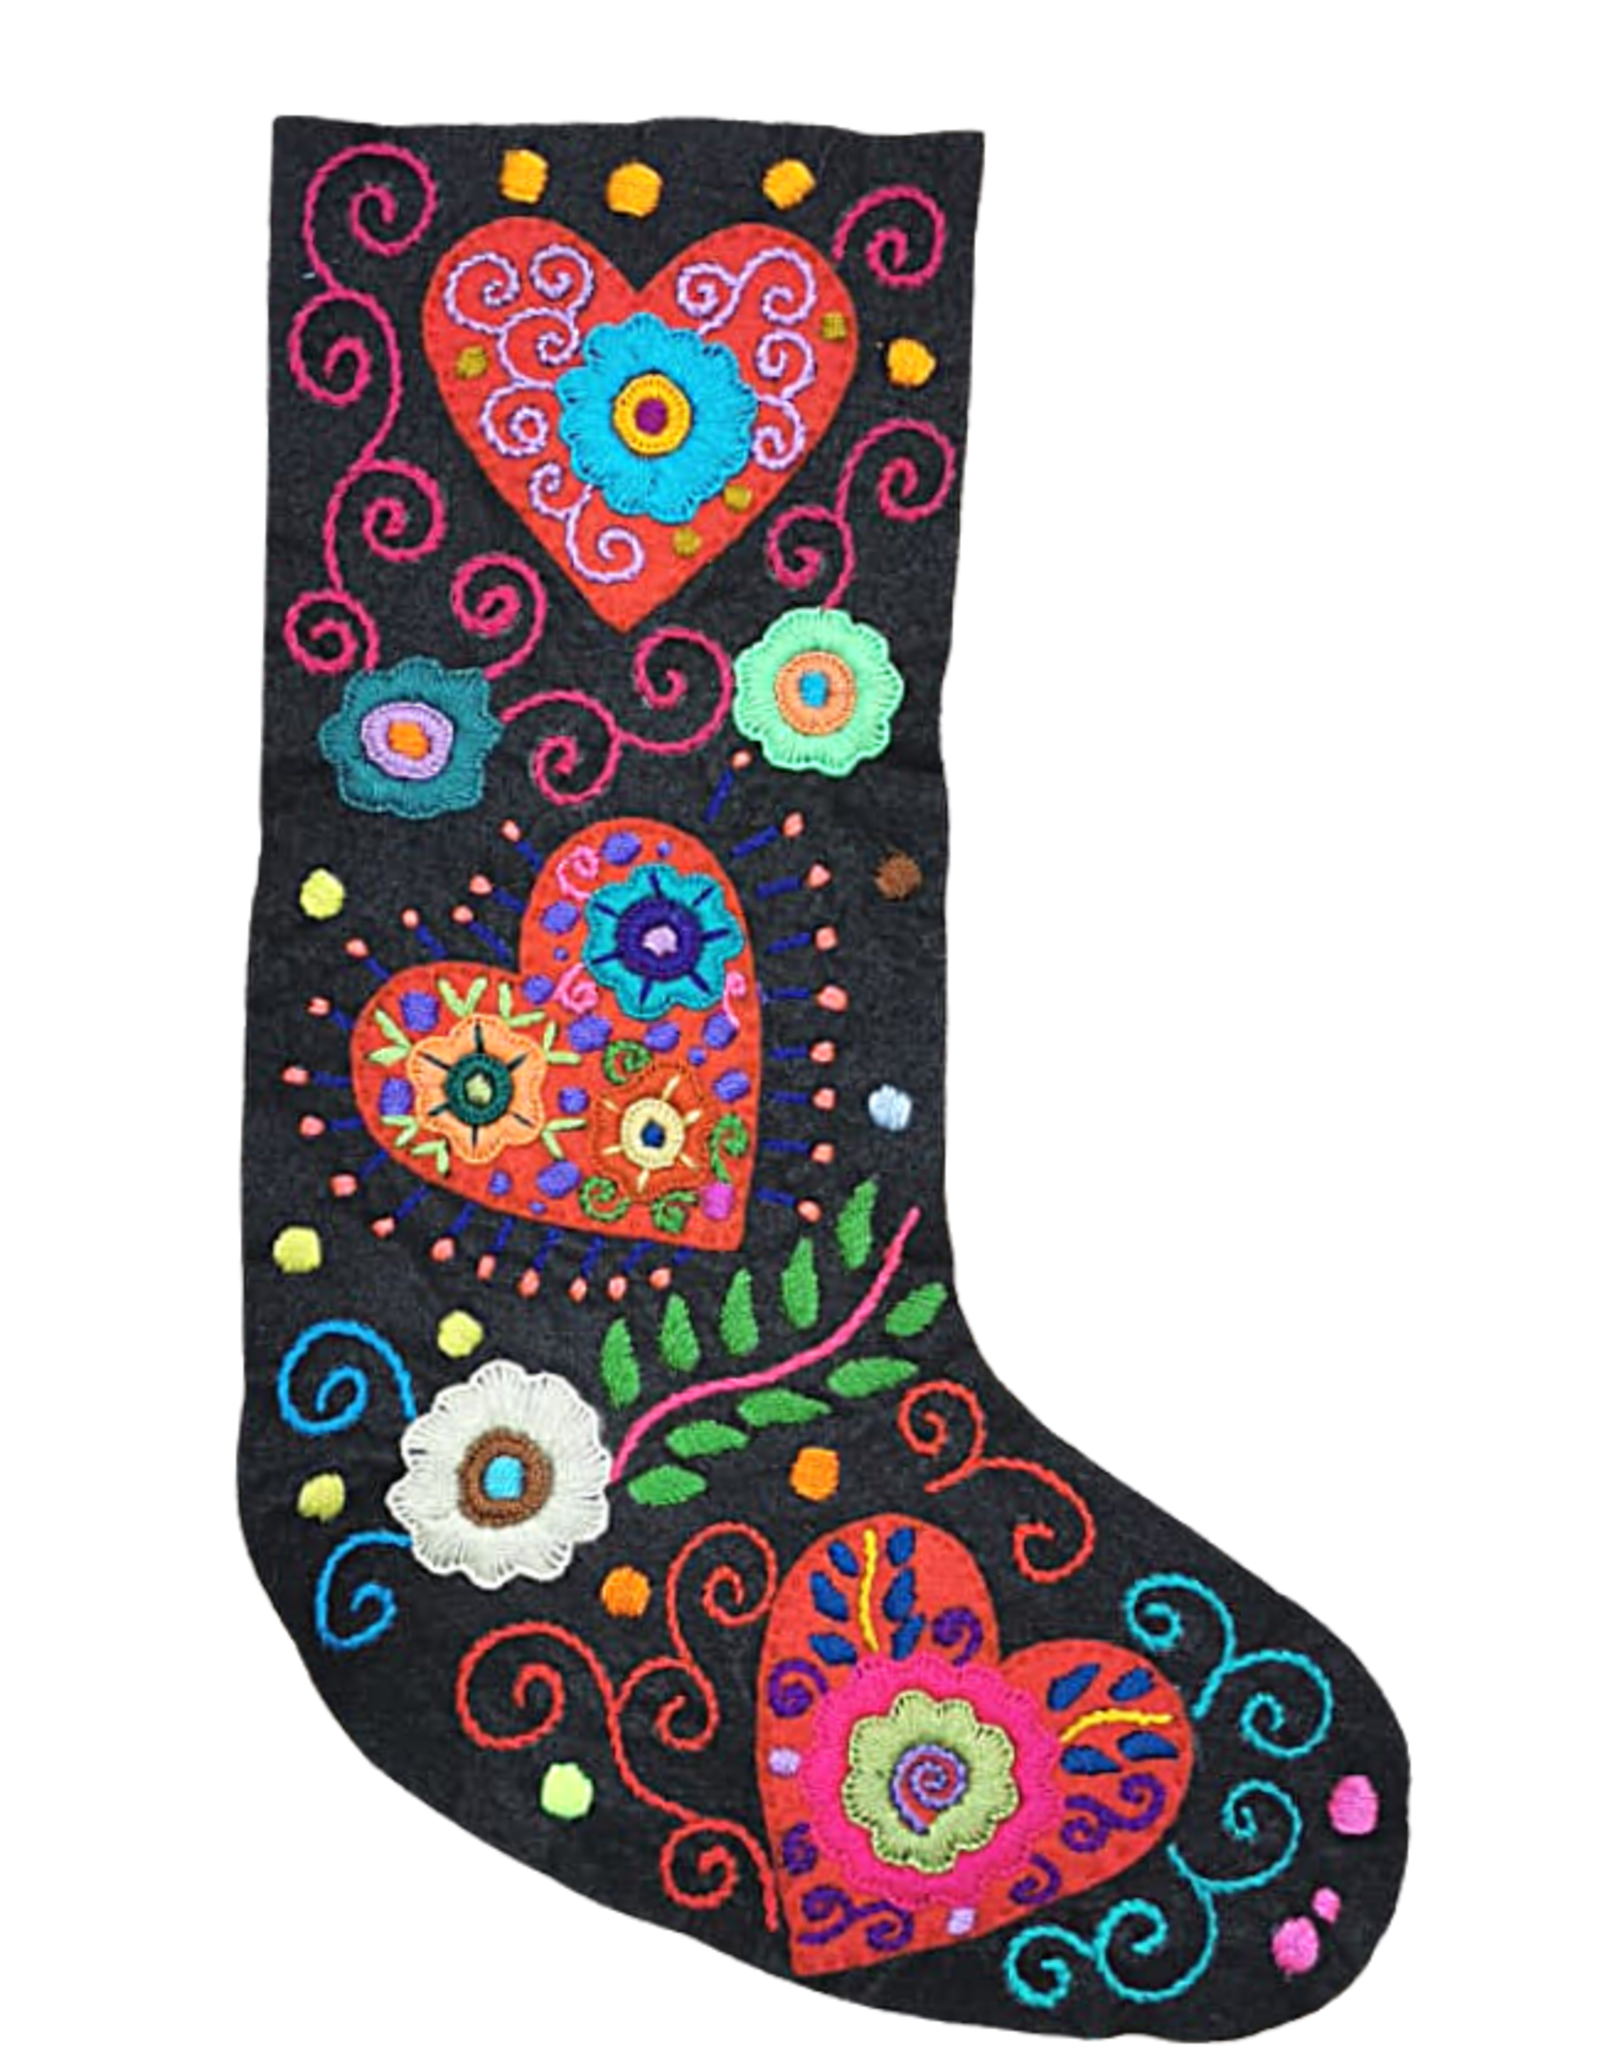 Nativa Holiday Embroidered Wool Stocking - Heart